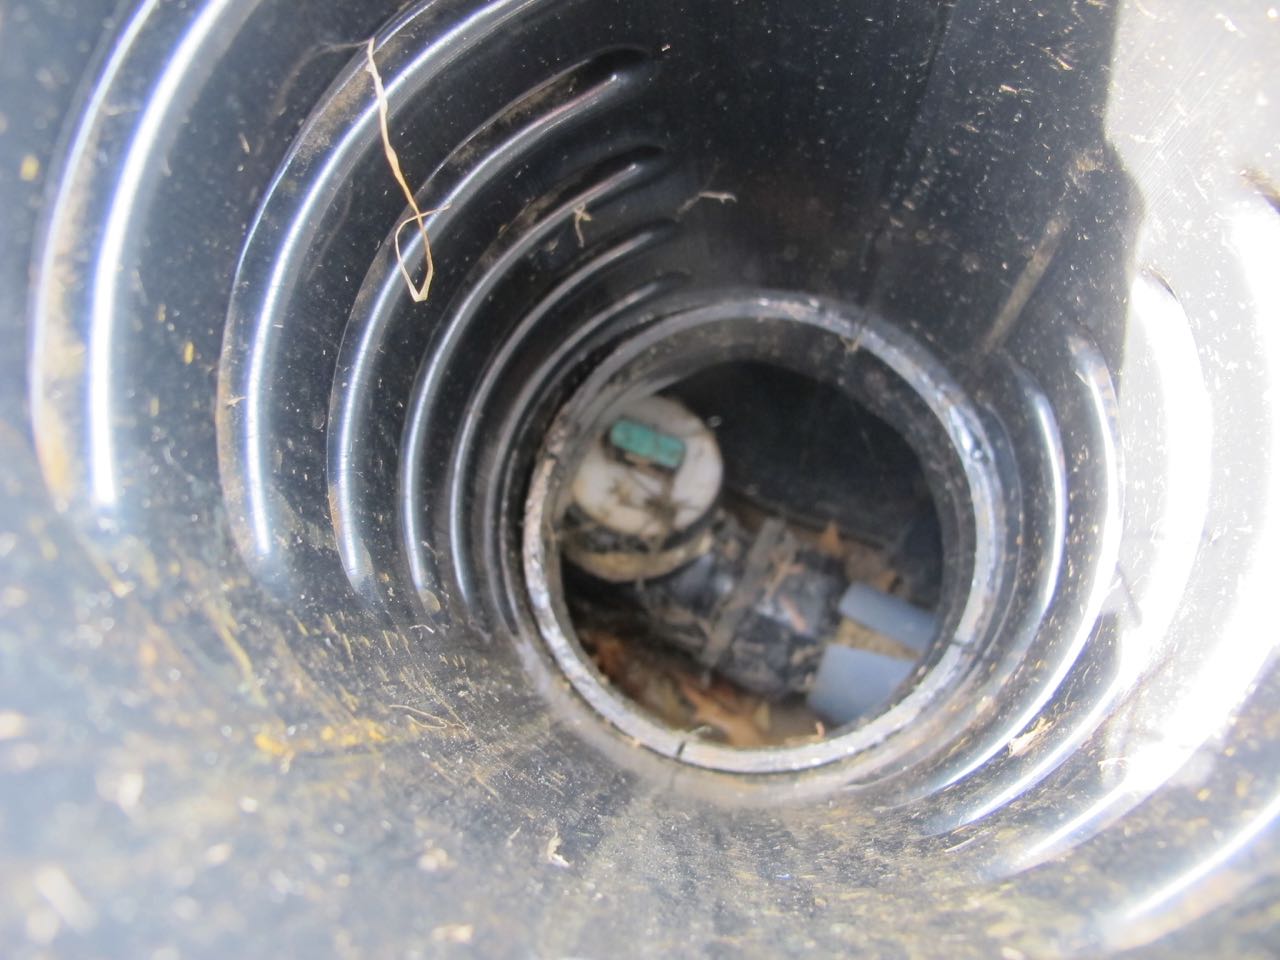 Inside pipe that stuck up 